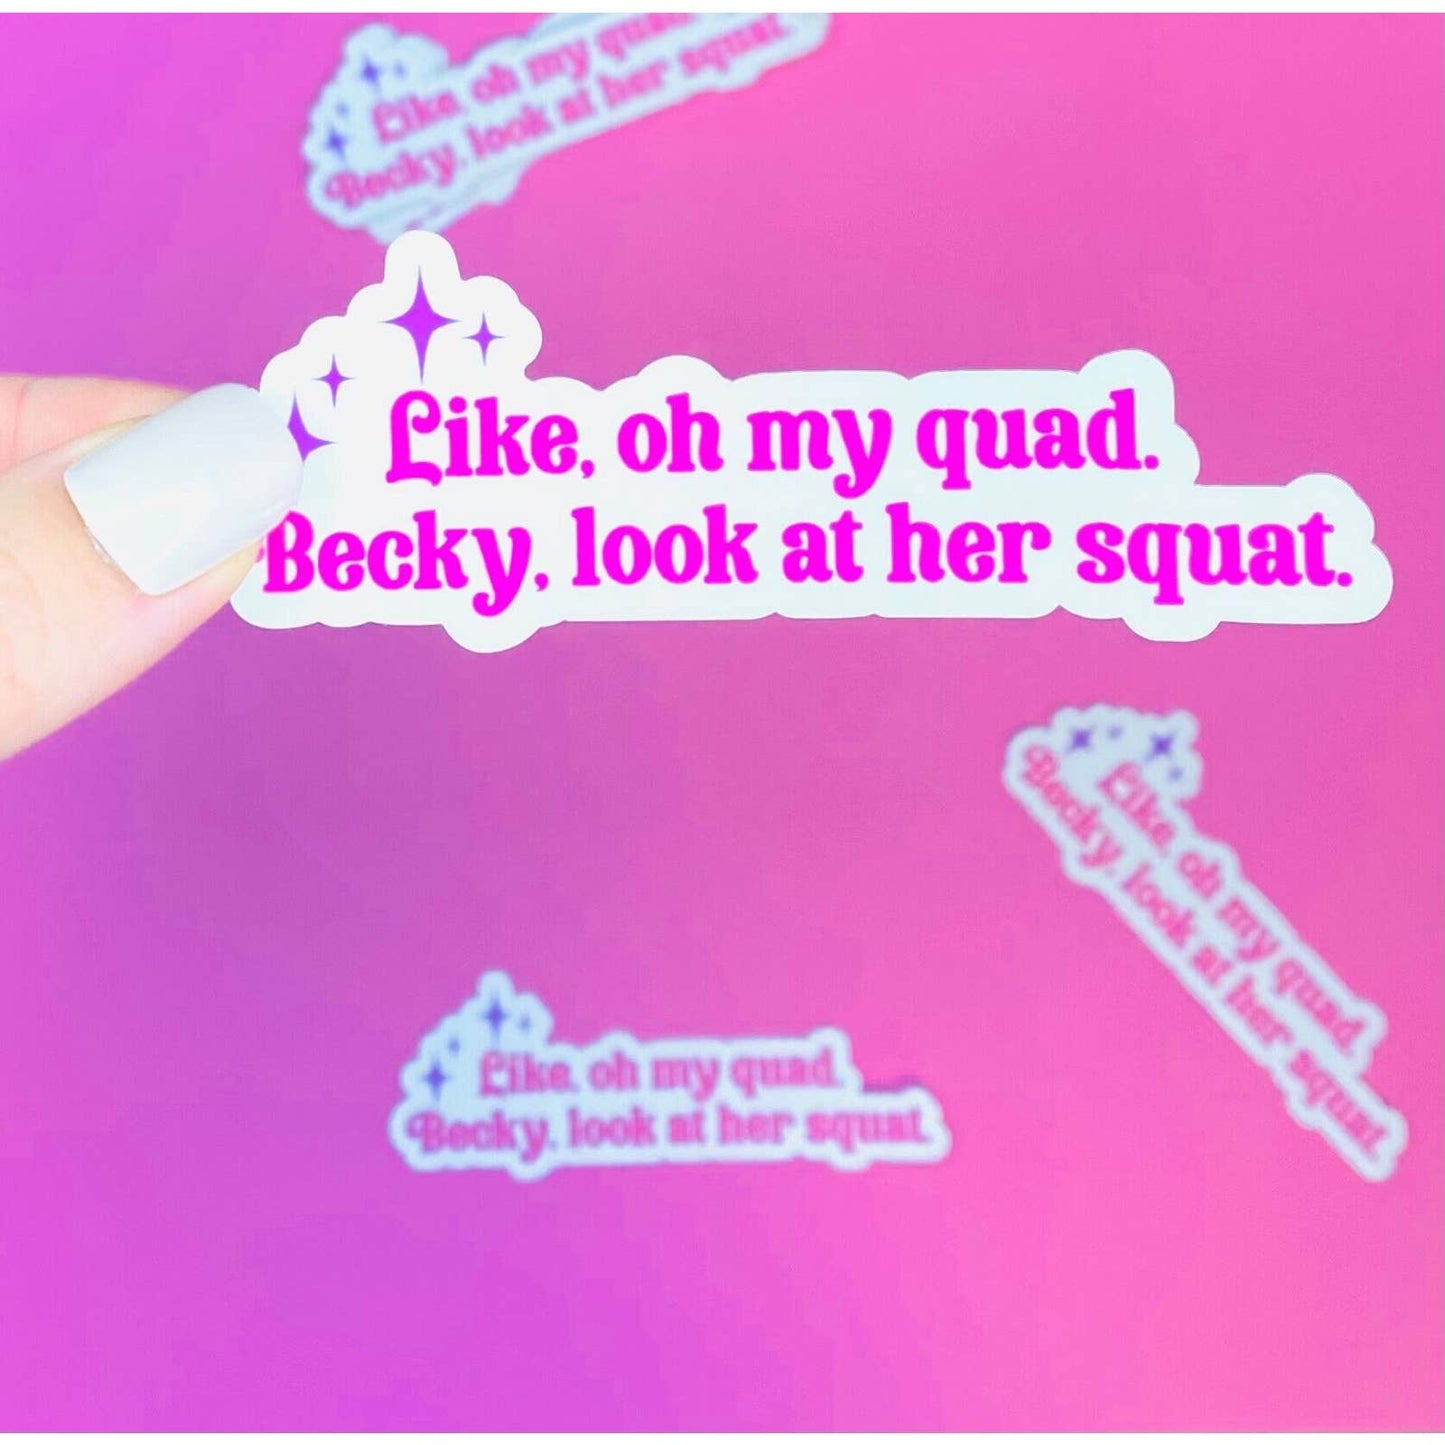 Gym Stickers - Stickers For Laptop - Oh My Quad Becky, Look at her Squat, Pink Stickers, Girly